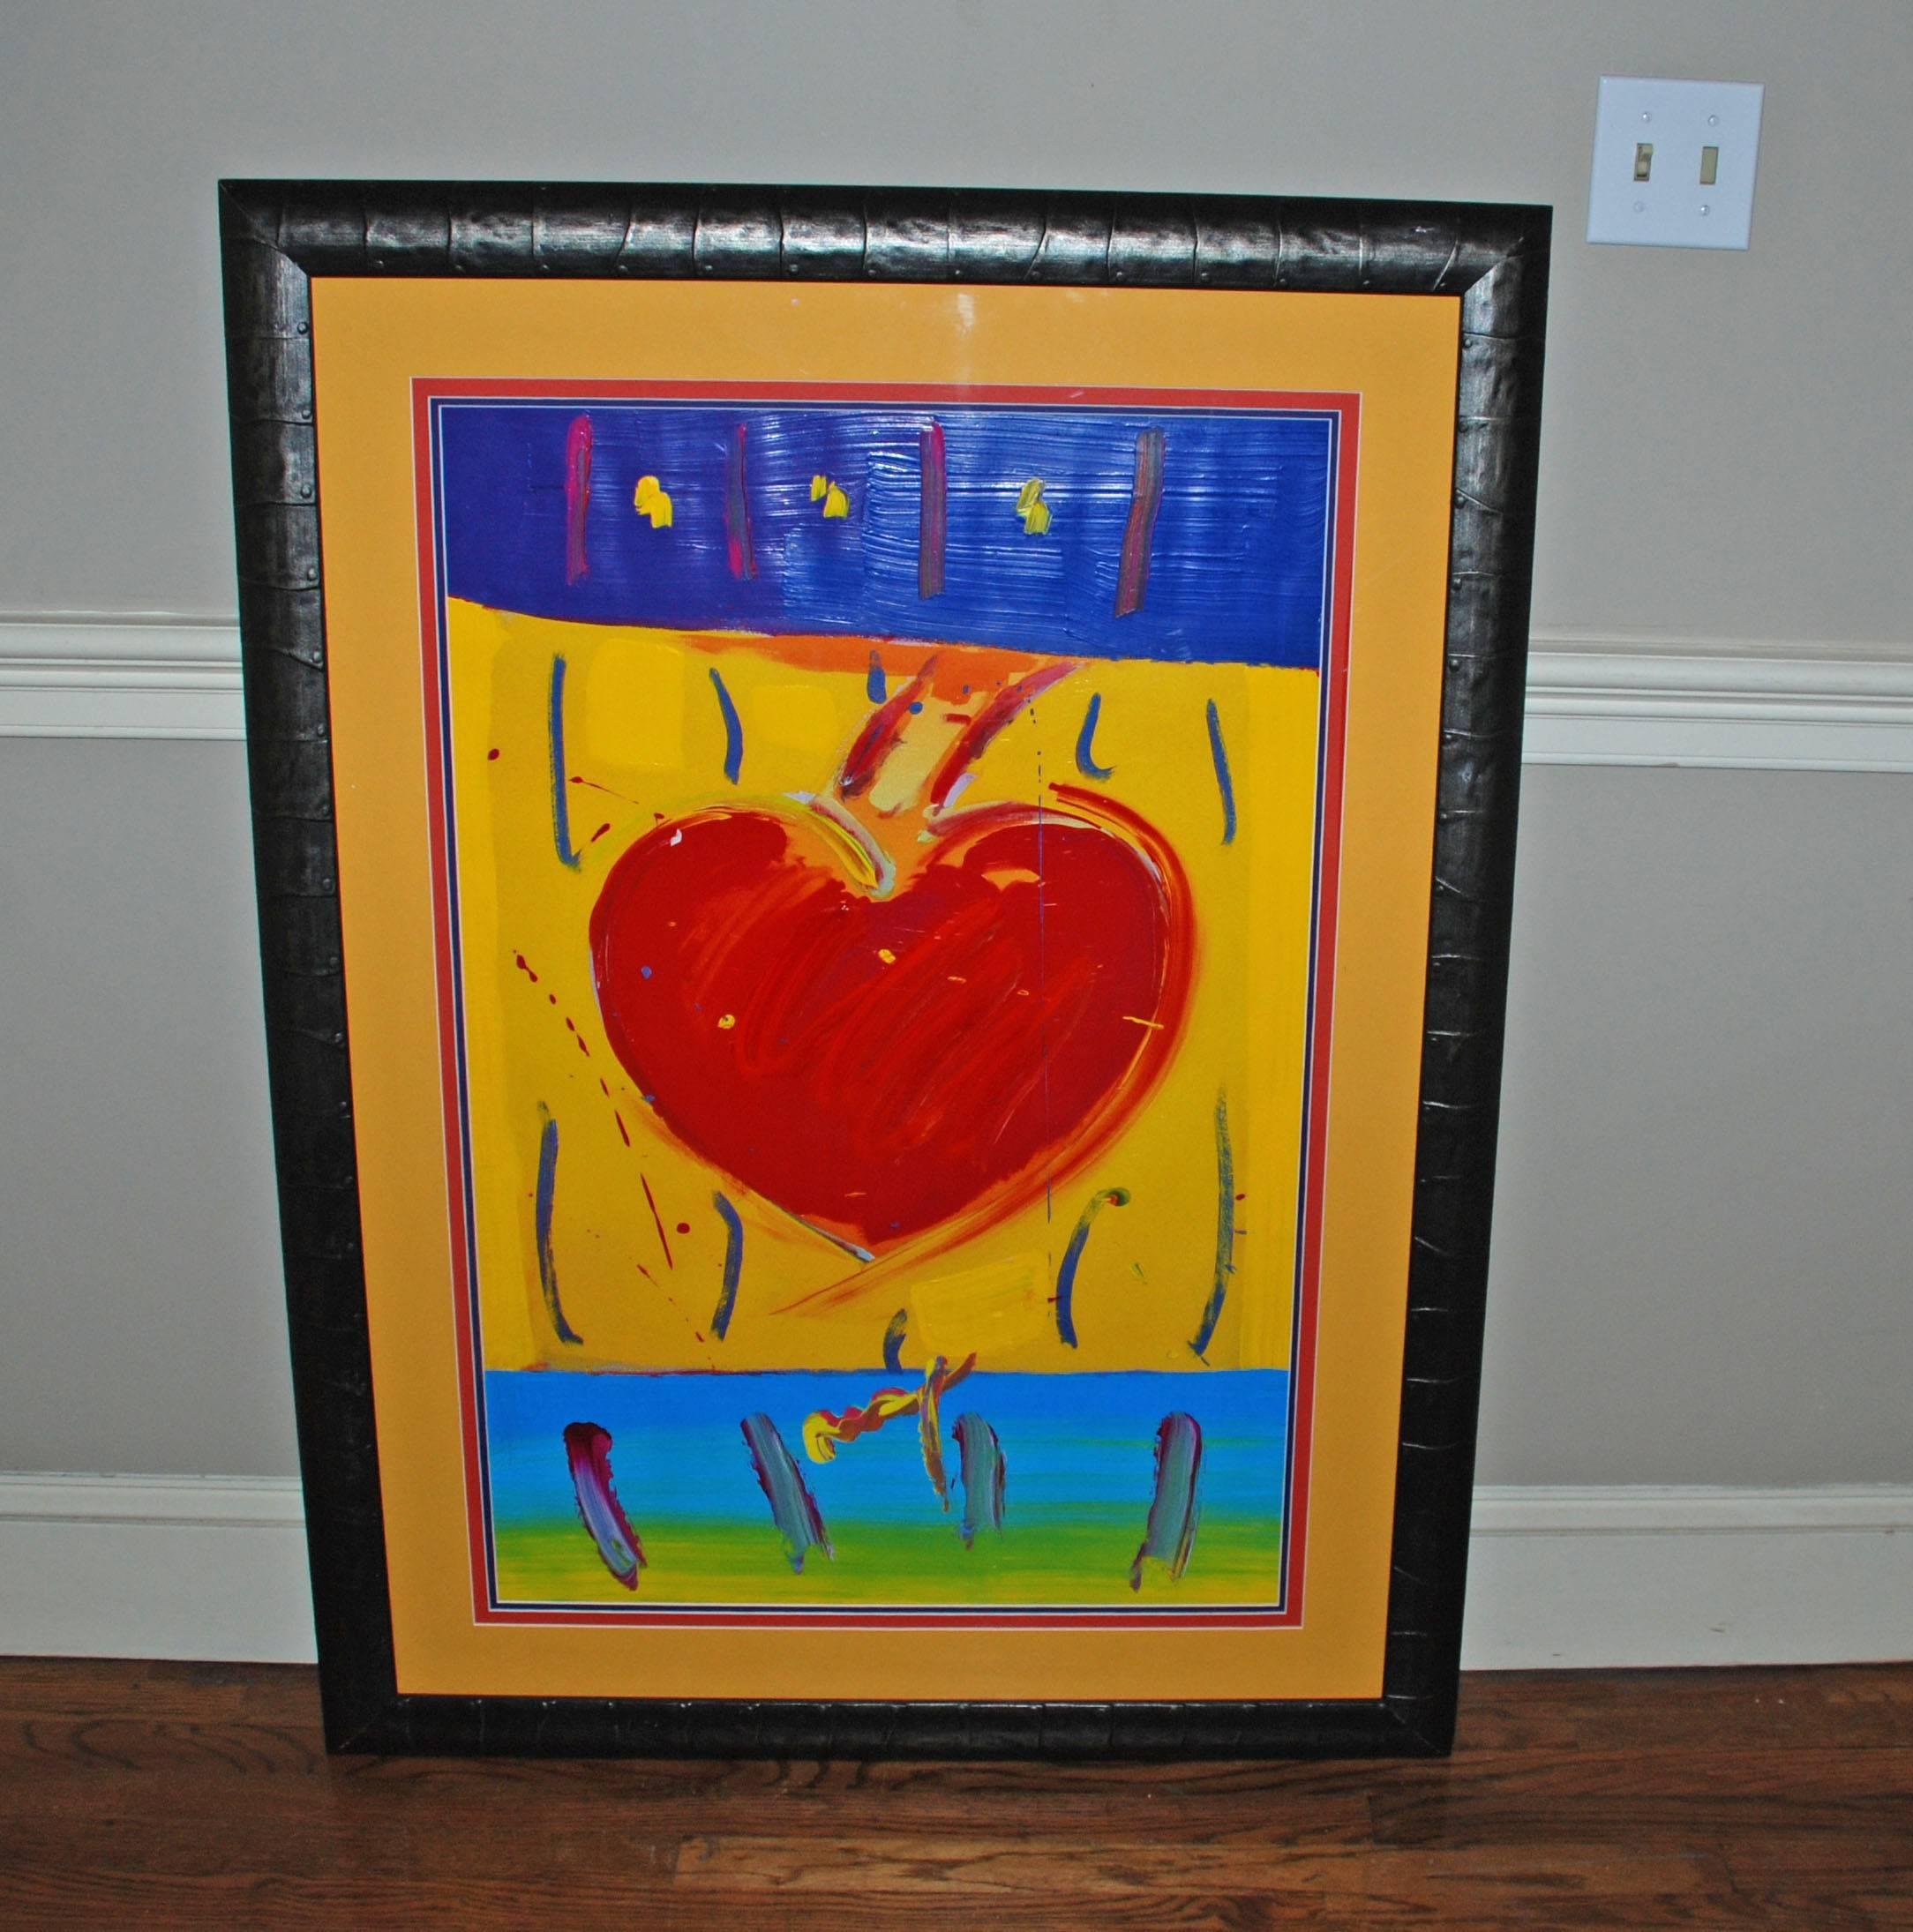 Artist: Peter Max
Medium: Acrylic on paper
Title: Lotta Love
Edition: Unique
Framed Size: 35 x 48 inches
Sheet Size: 25 x 37 inches
Signed: Signed in acrylic paint